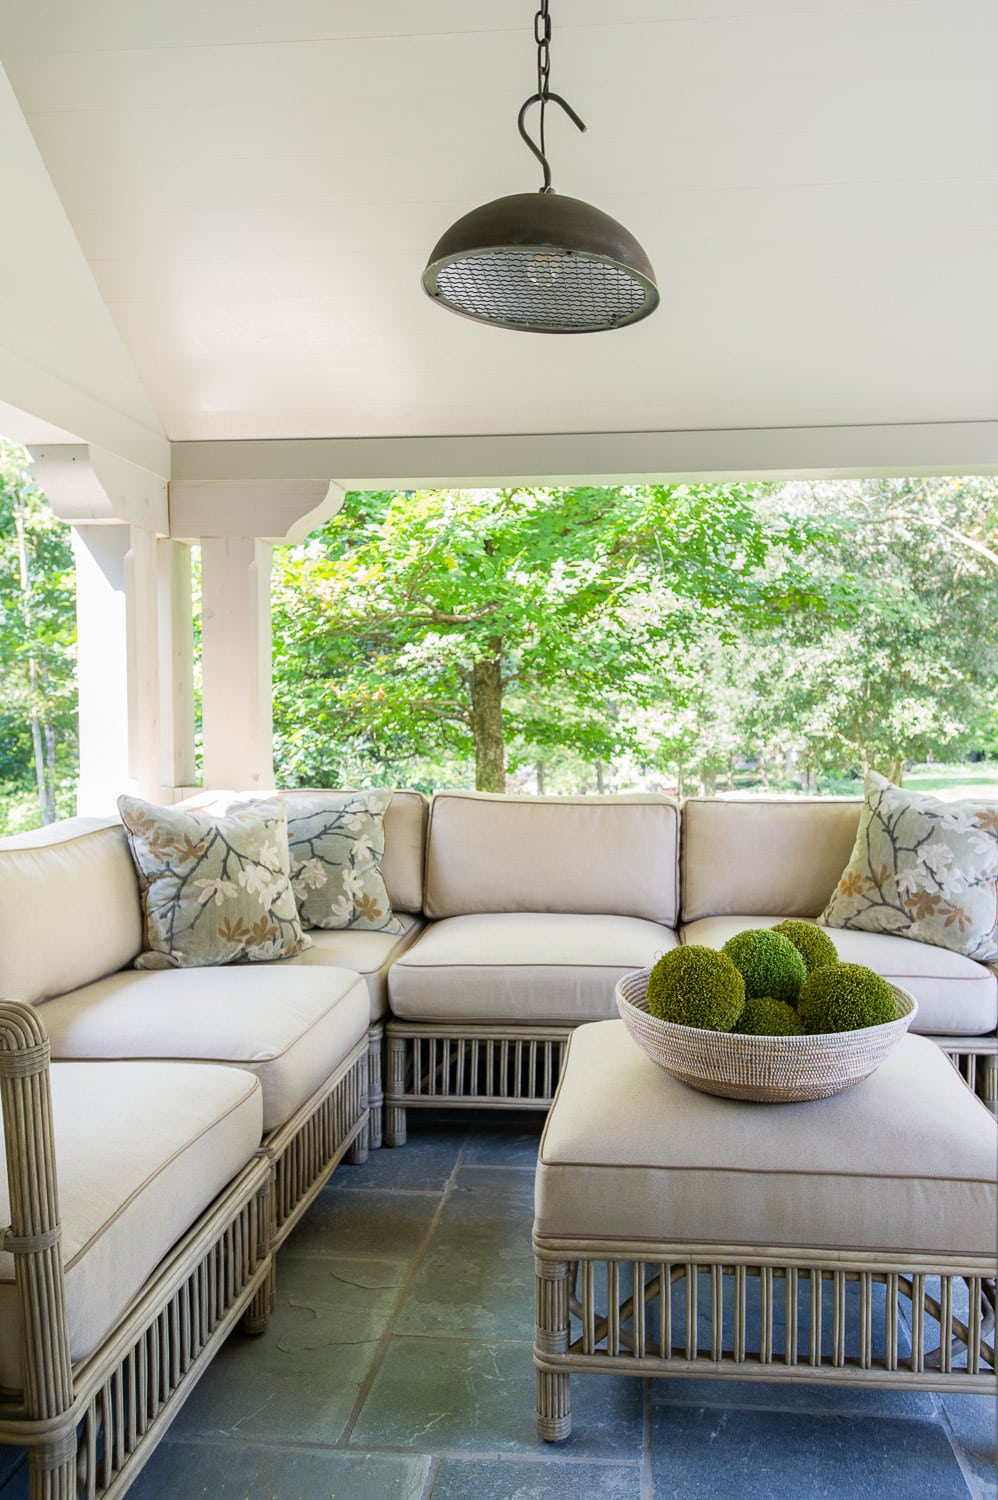 faux-rattan sofa set in traditional patio featured in home tour